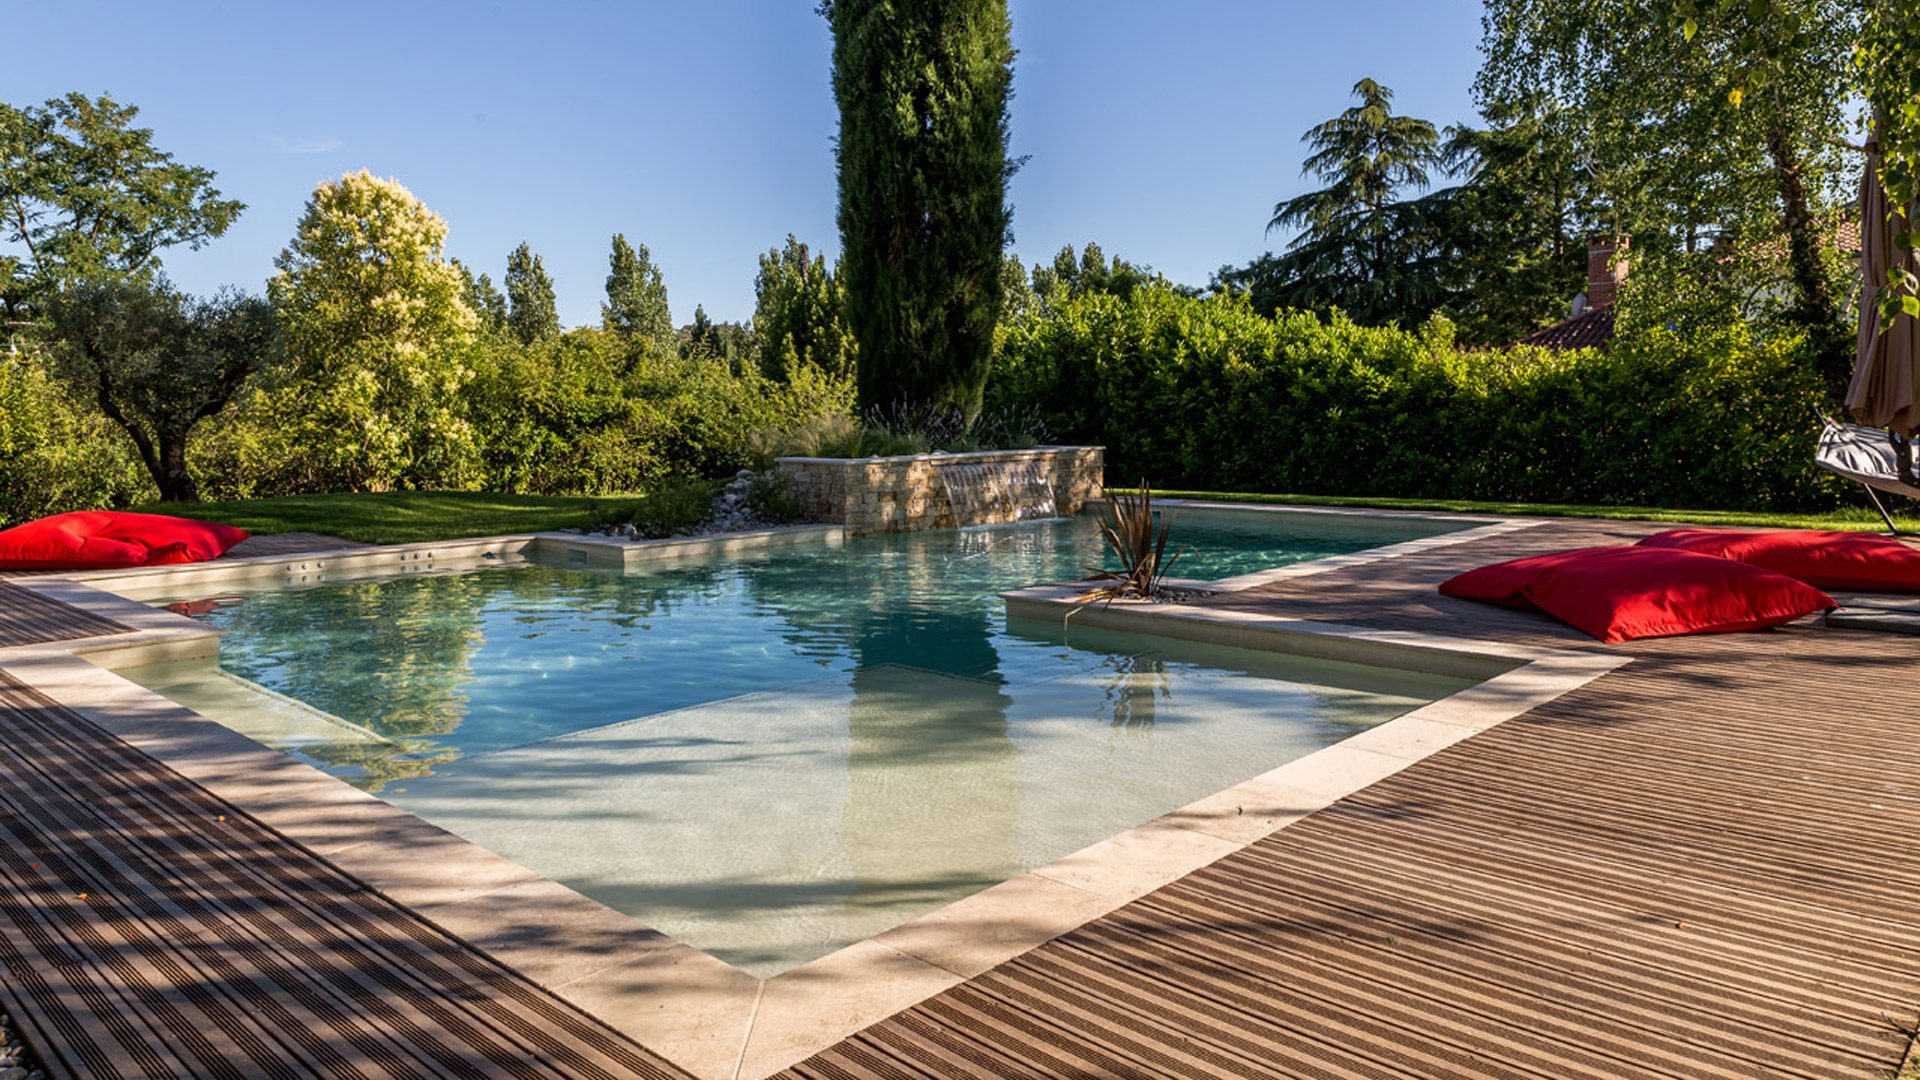 Stay in Albi in bed and breakfast, in the city center, with swimming pool